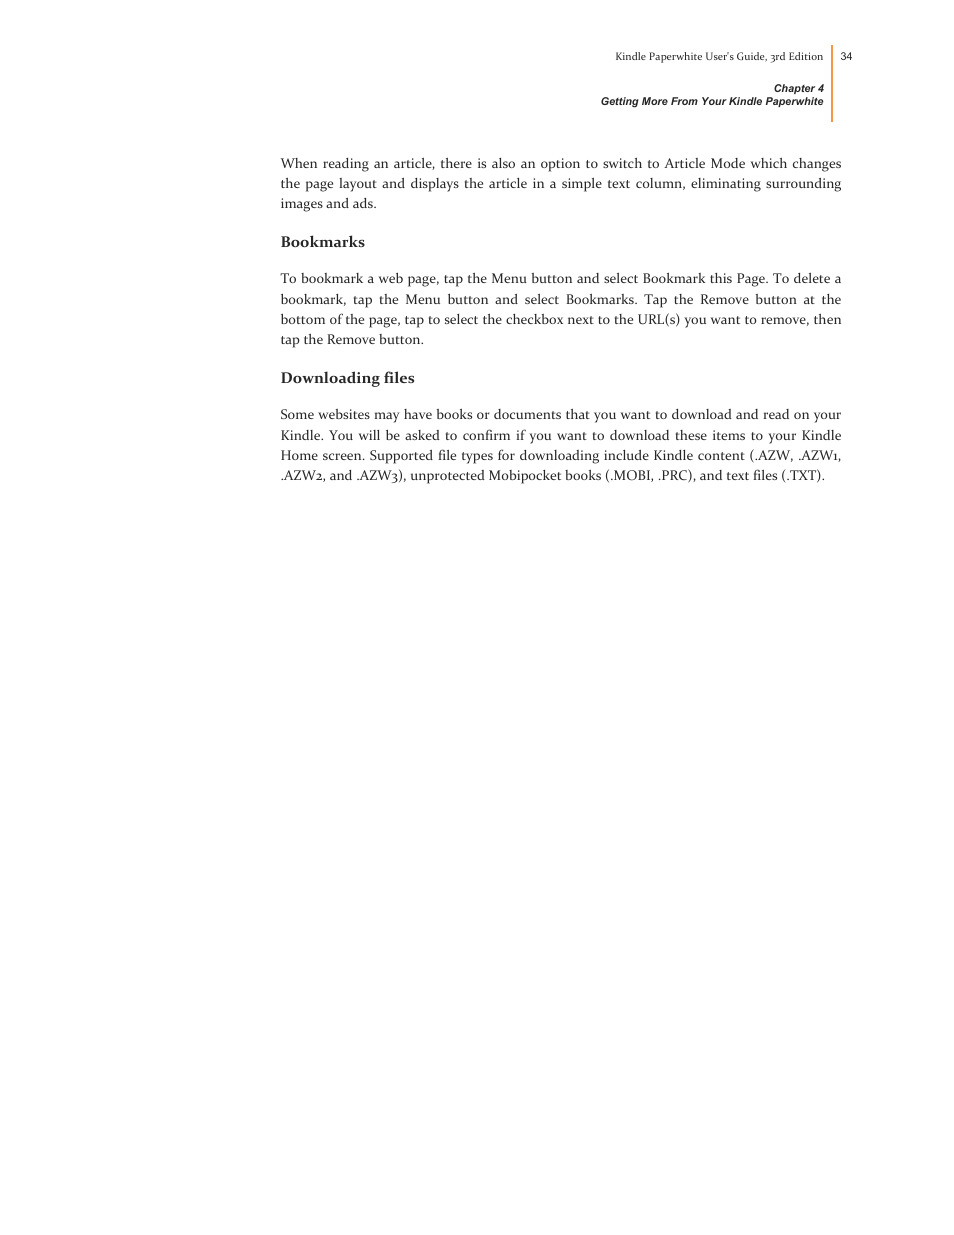 Bookmarks, Downloading files | Kindle Paperwhite (2nd Generation) User Manual | Page 34 / 47